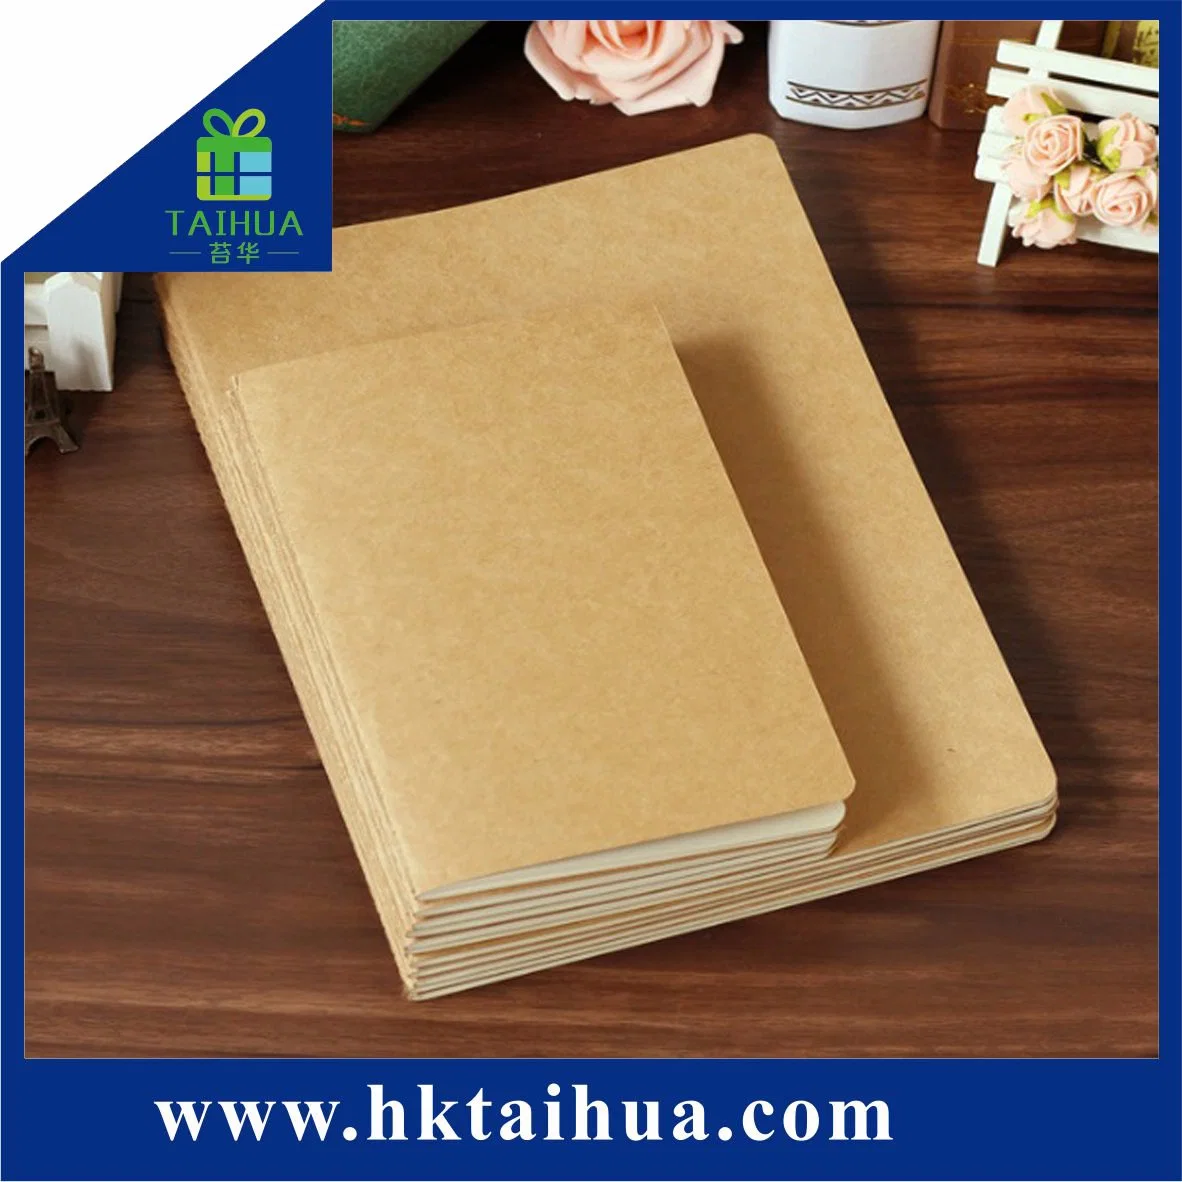 Cheap Price Promotion Item Stationery School/Office/Business Supplies Notebook with Custom Kraft